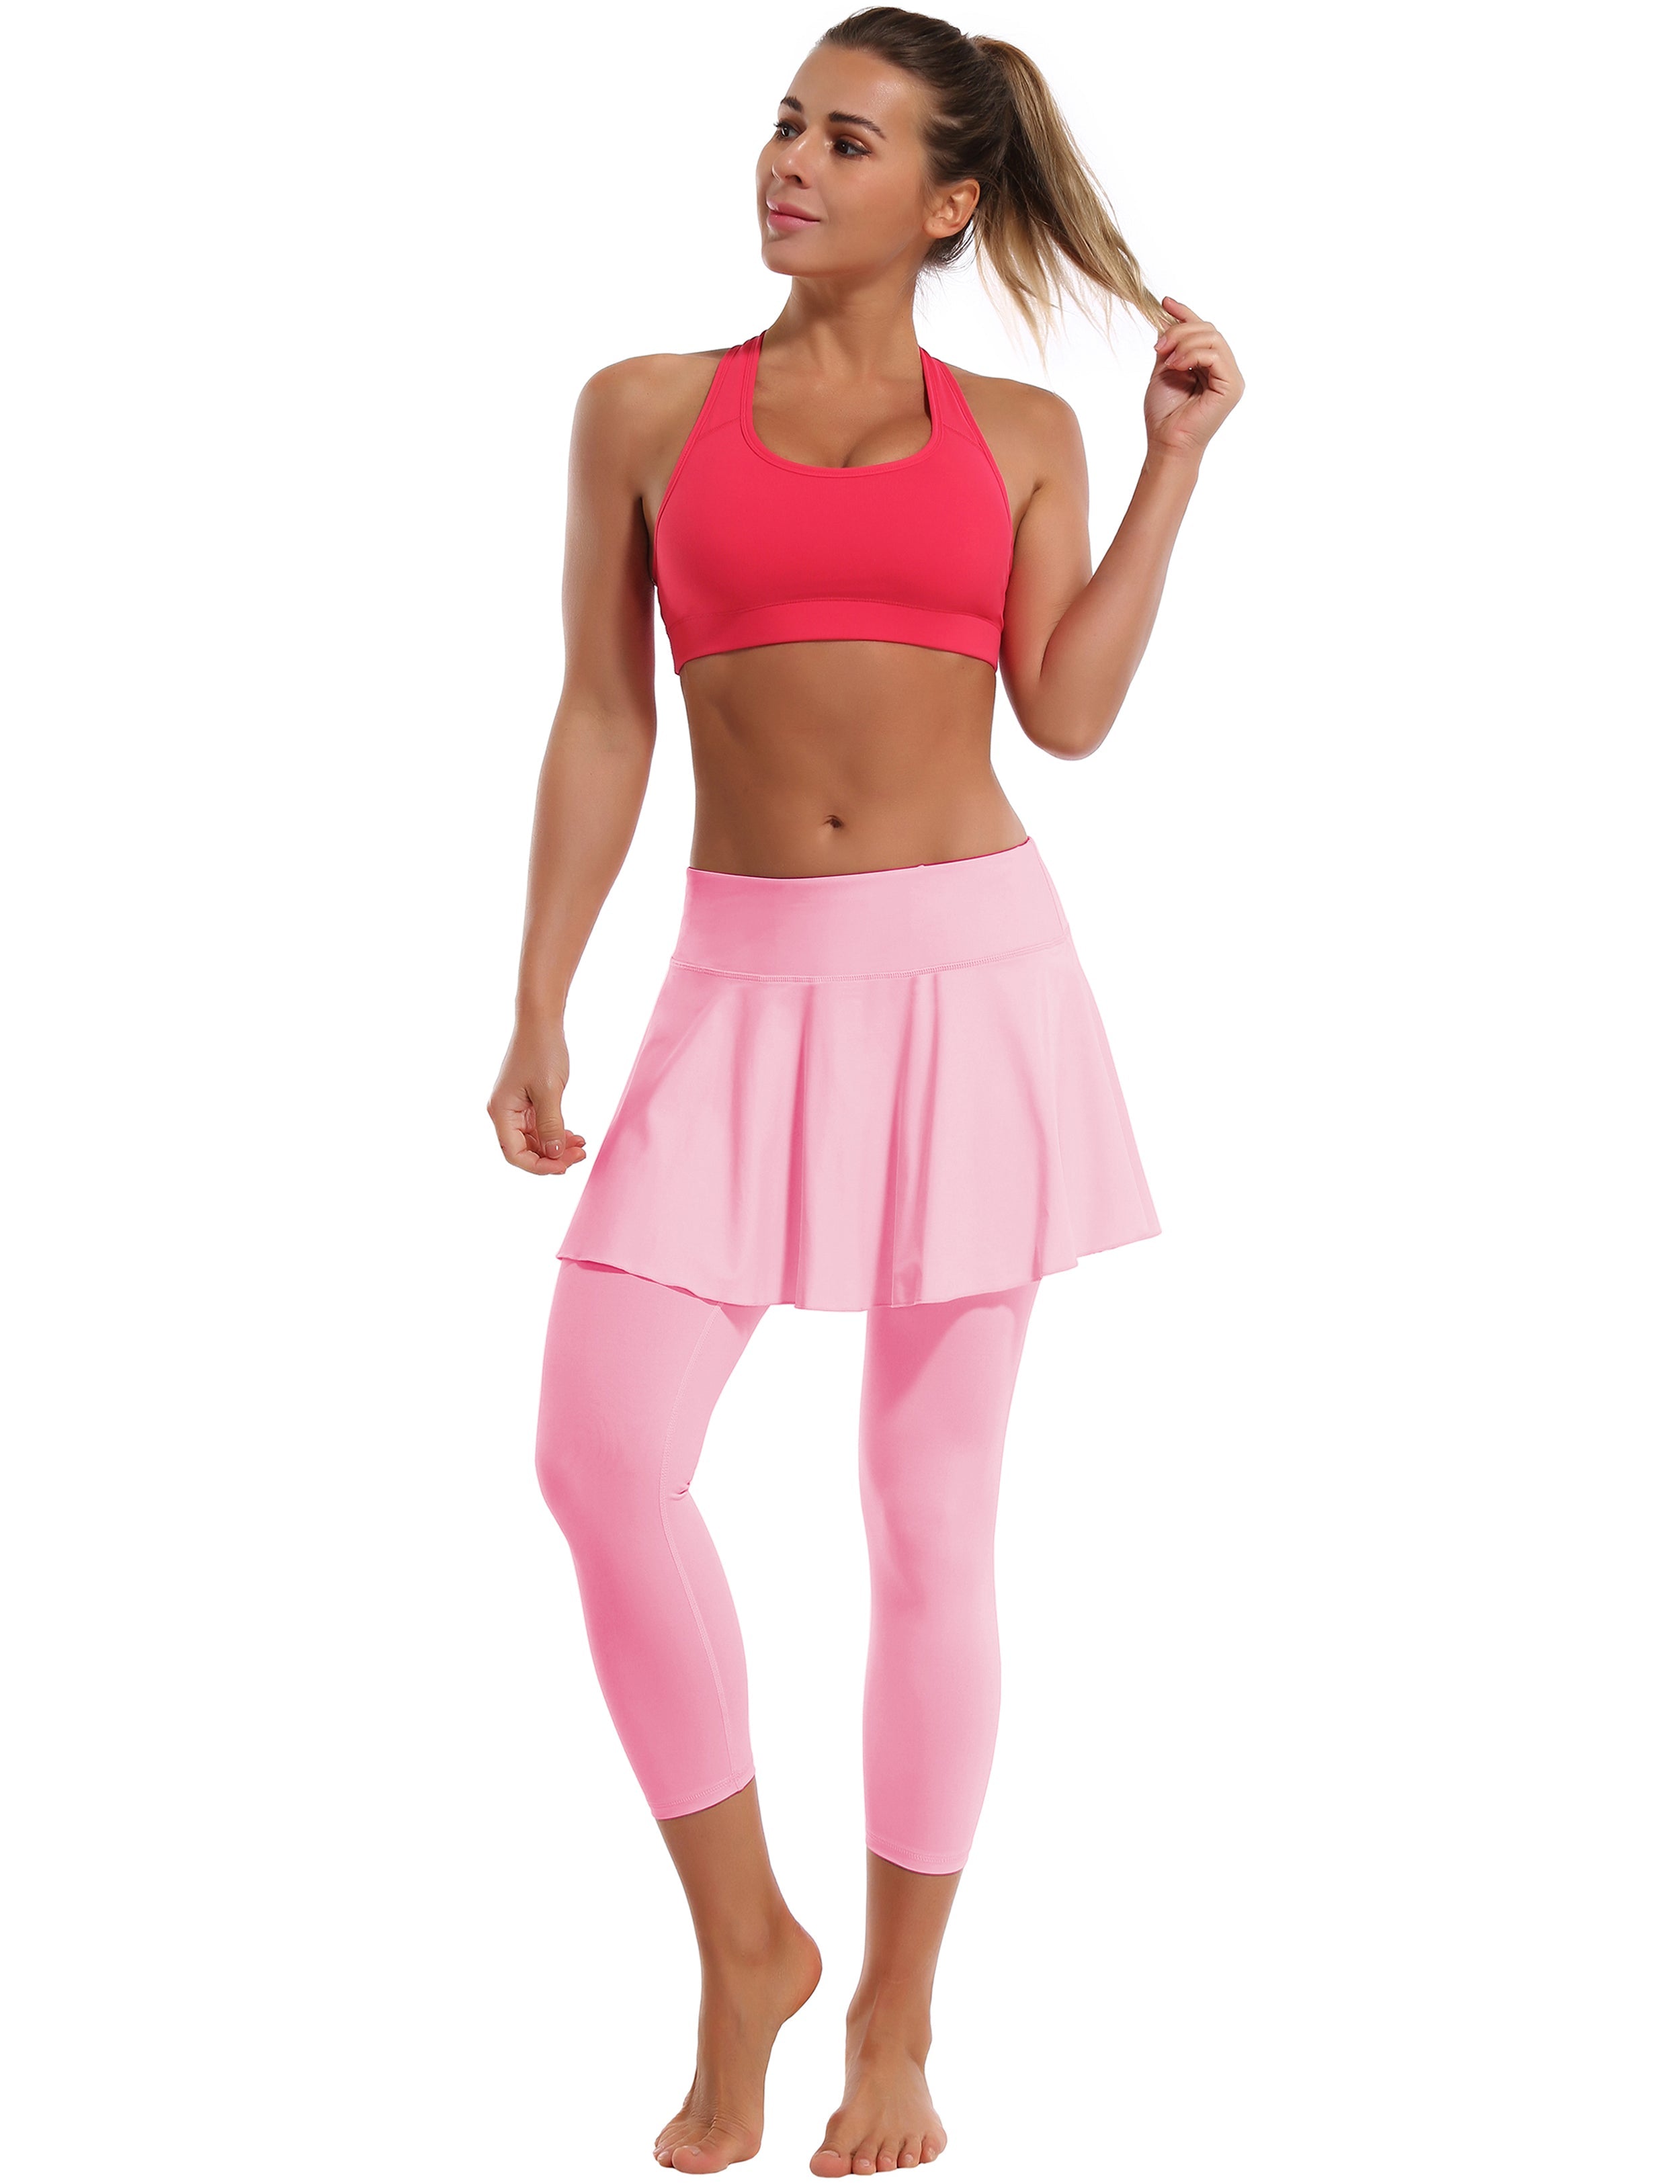 19" Capris Tennis Golf Skirted Leggings with Pockets lightpink 80%Nylon/20%Spandex UPF 50+ sun protection Elastic closure Lightweight, Wrinkle Moisture wicking Quick drying Secure & comfortable two layer Hidden pocket